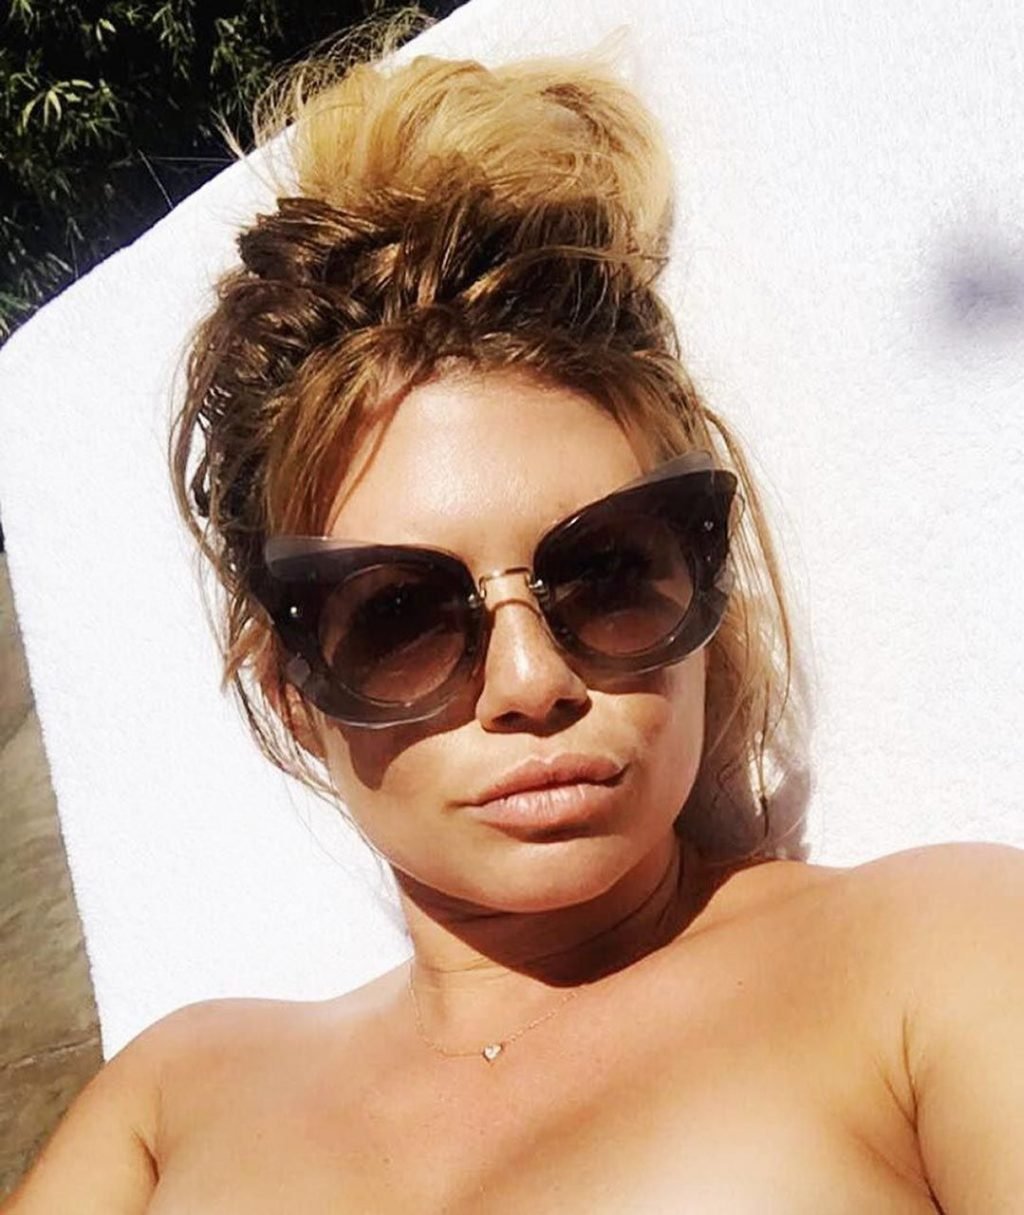 Chanel west coast topless pics